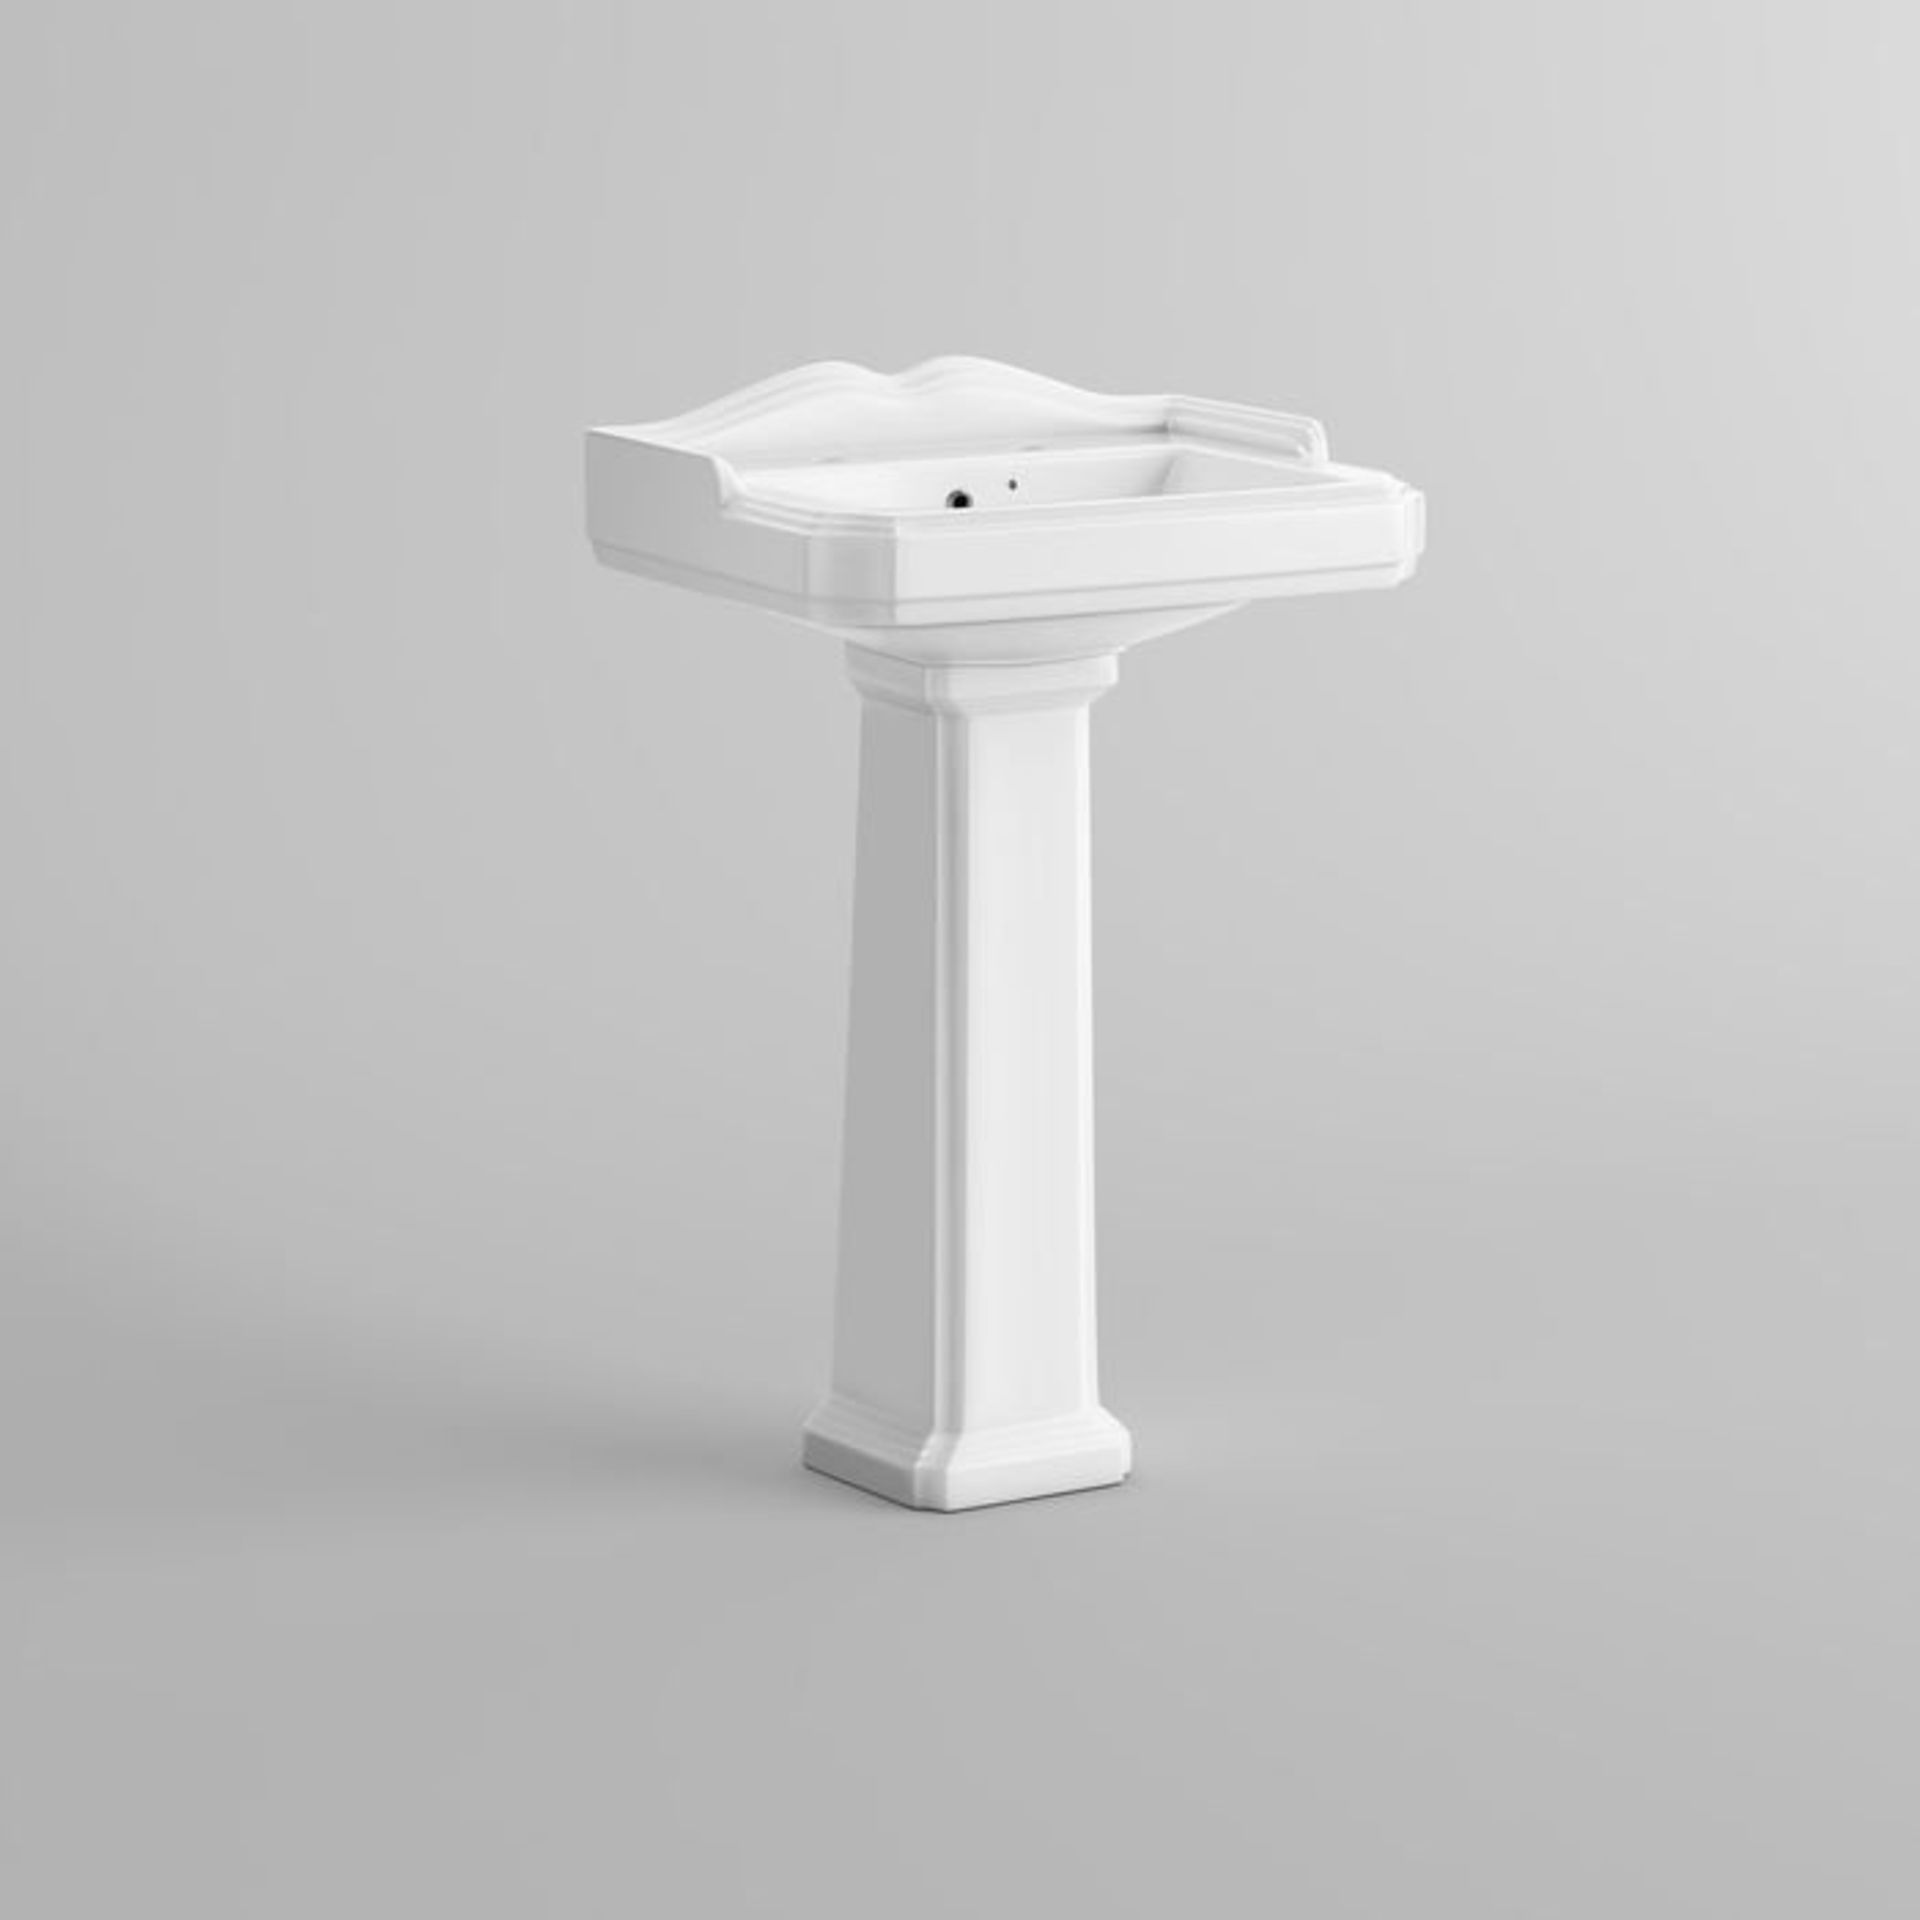 (V236) Victoria Basin & Pedestal - Double Tap Hole. RRP £175.99. Made from White Vitreous China - Image 2 of 3